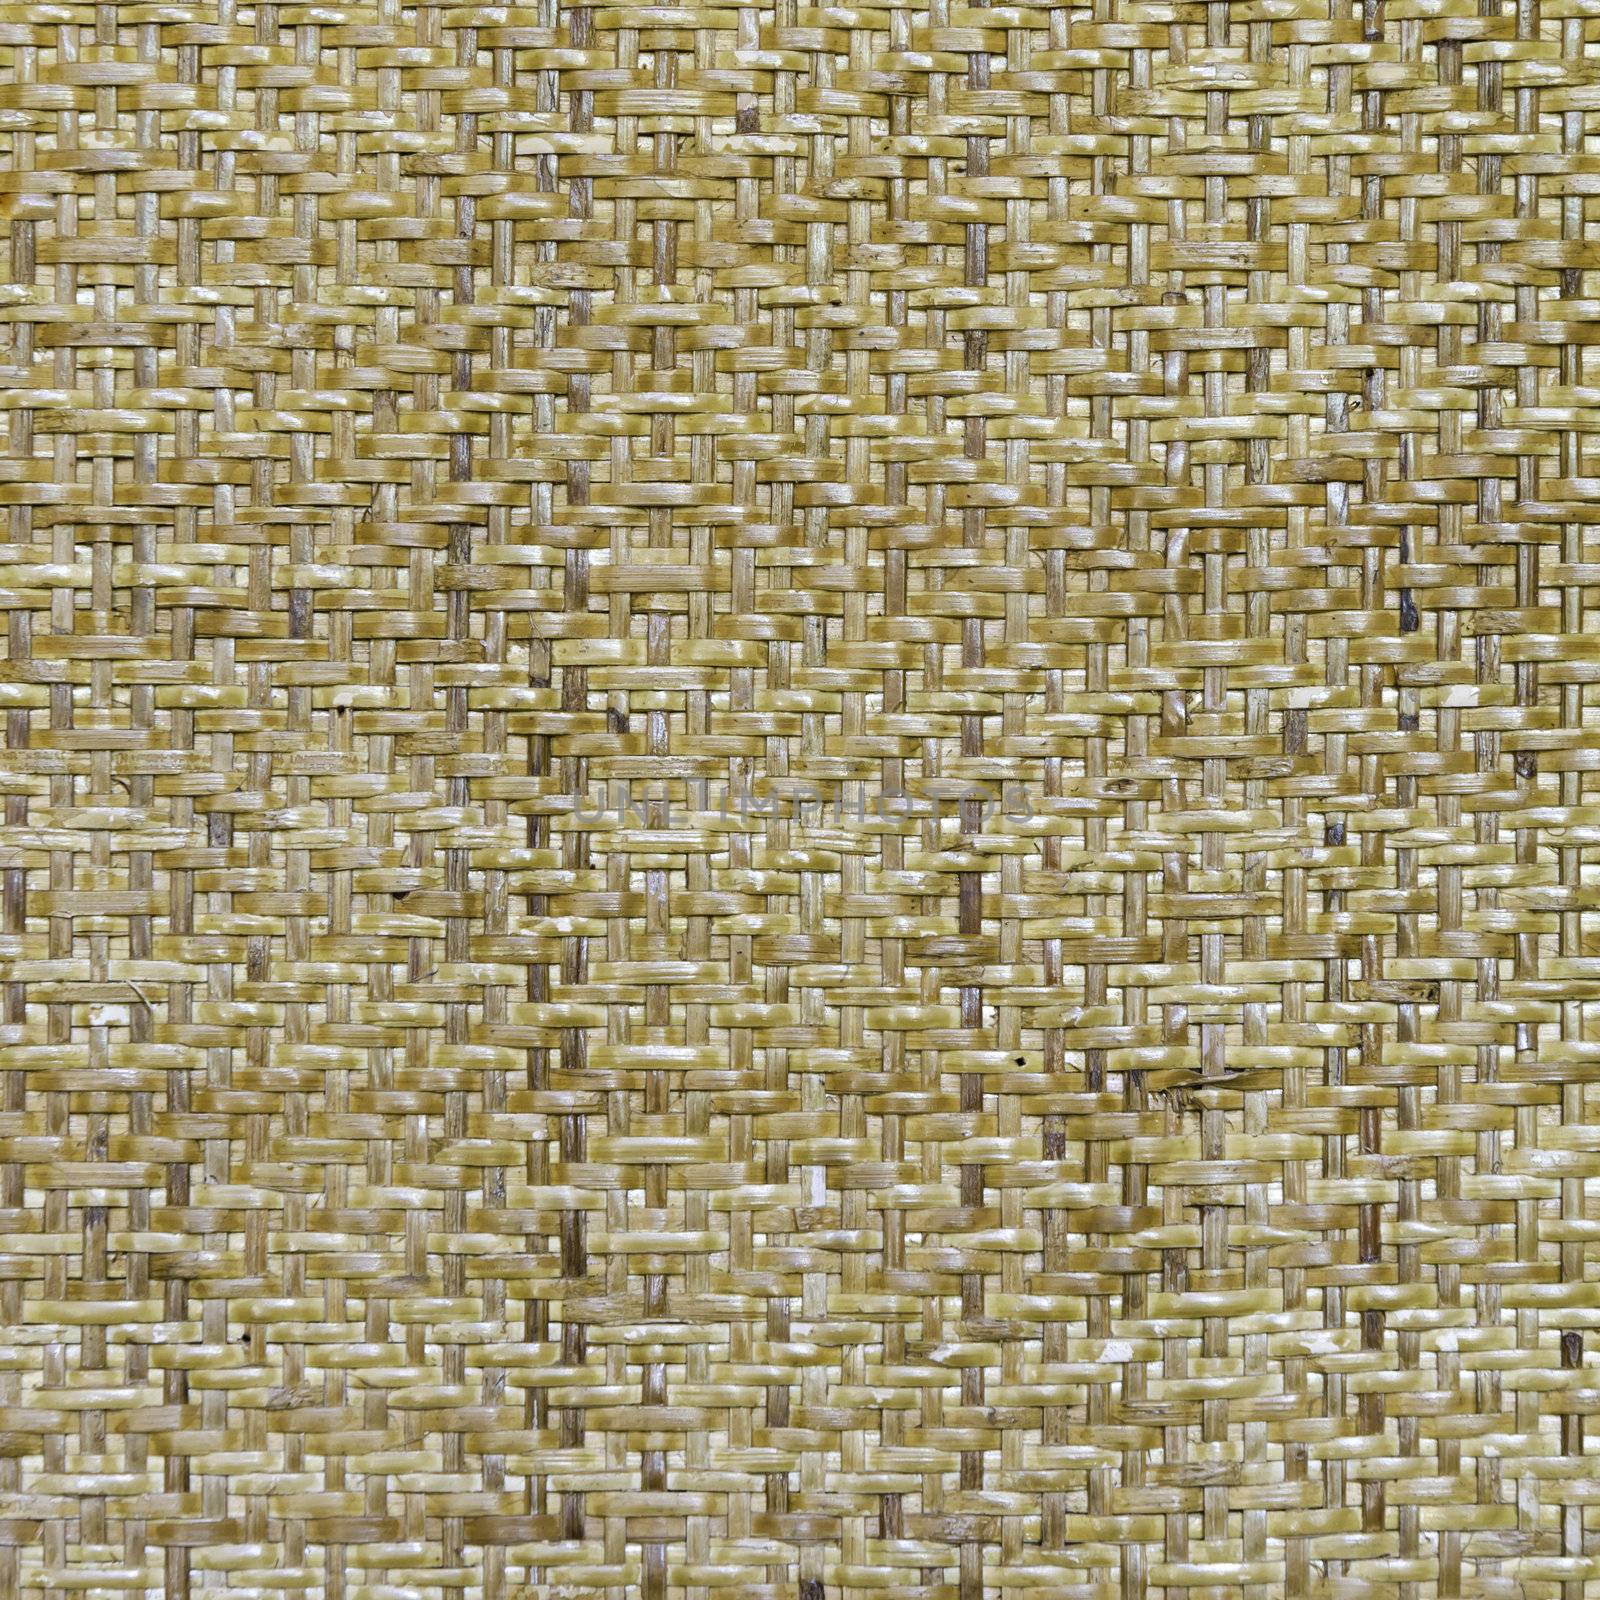 Weave texture natural wicker  by siraanamwong